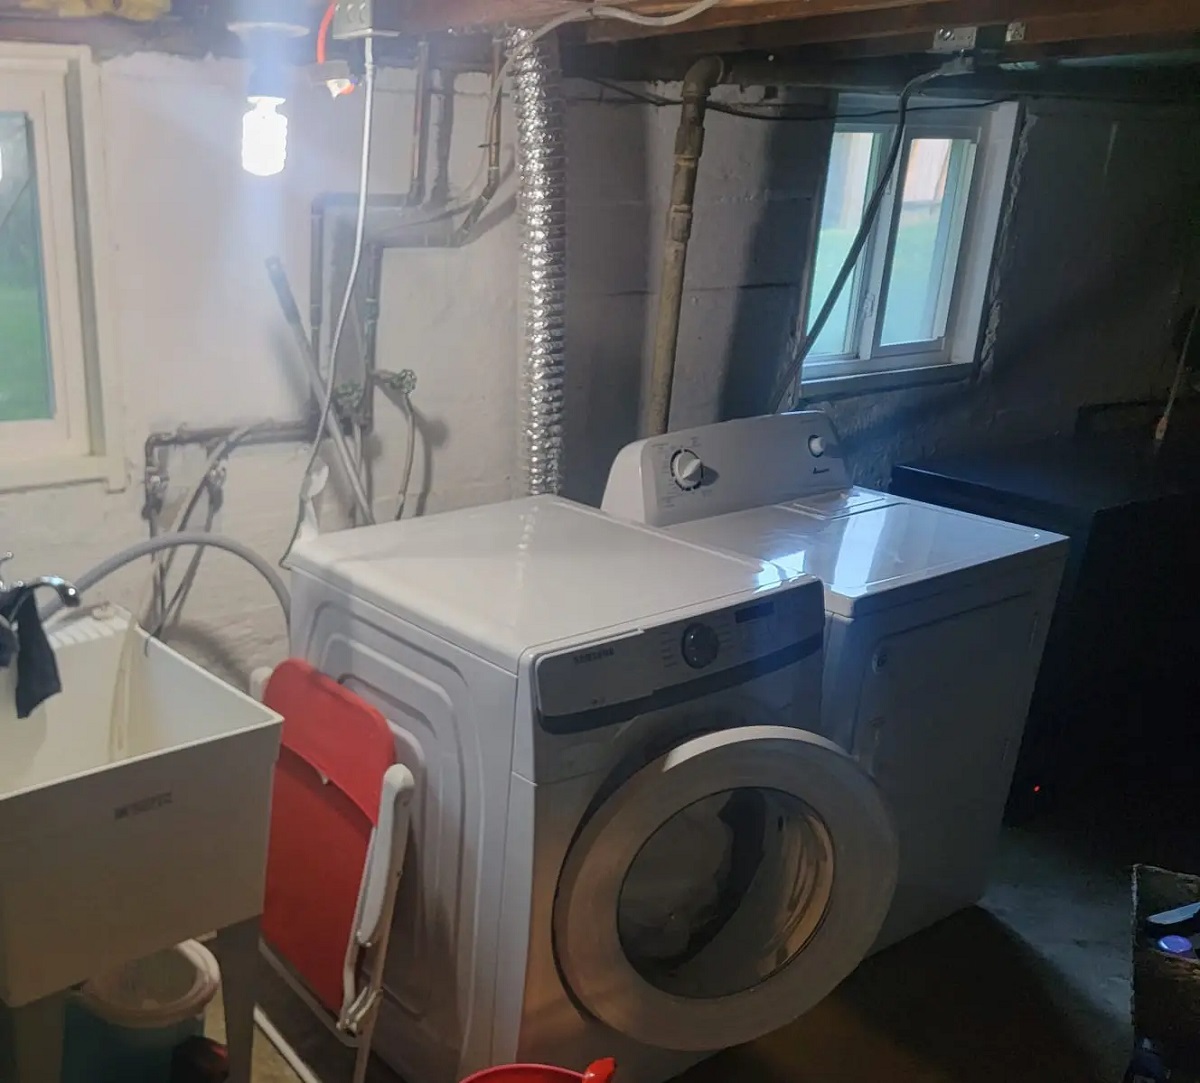 How To Vent A Dryer In A Basement